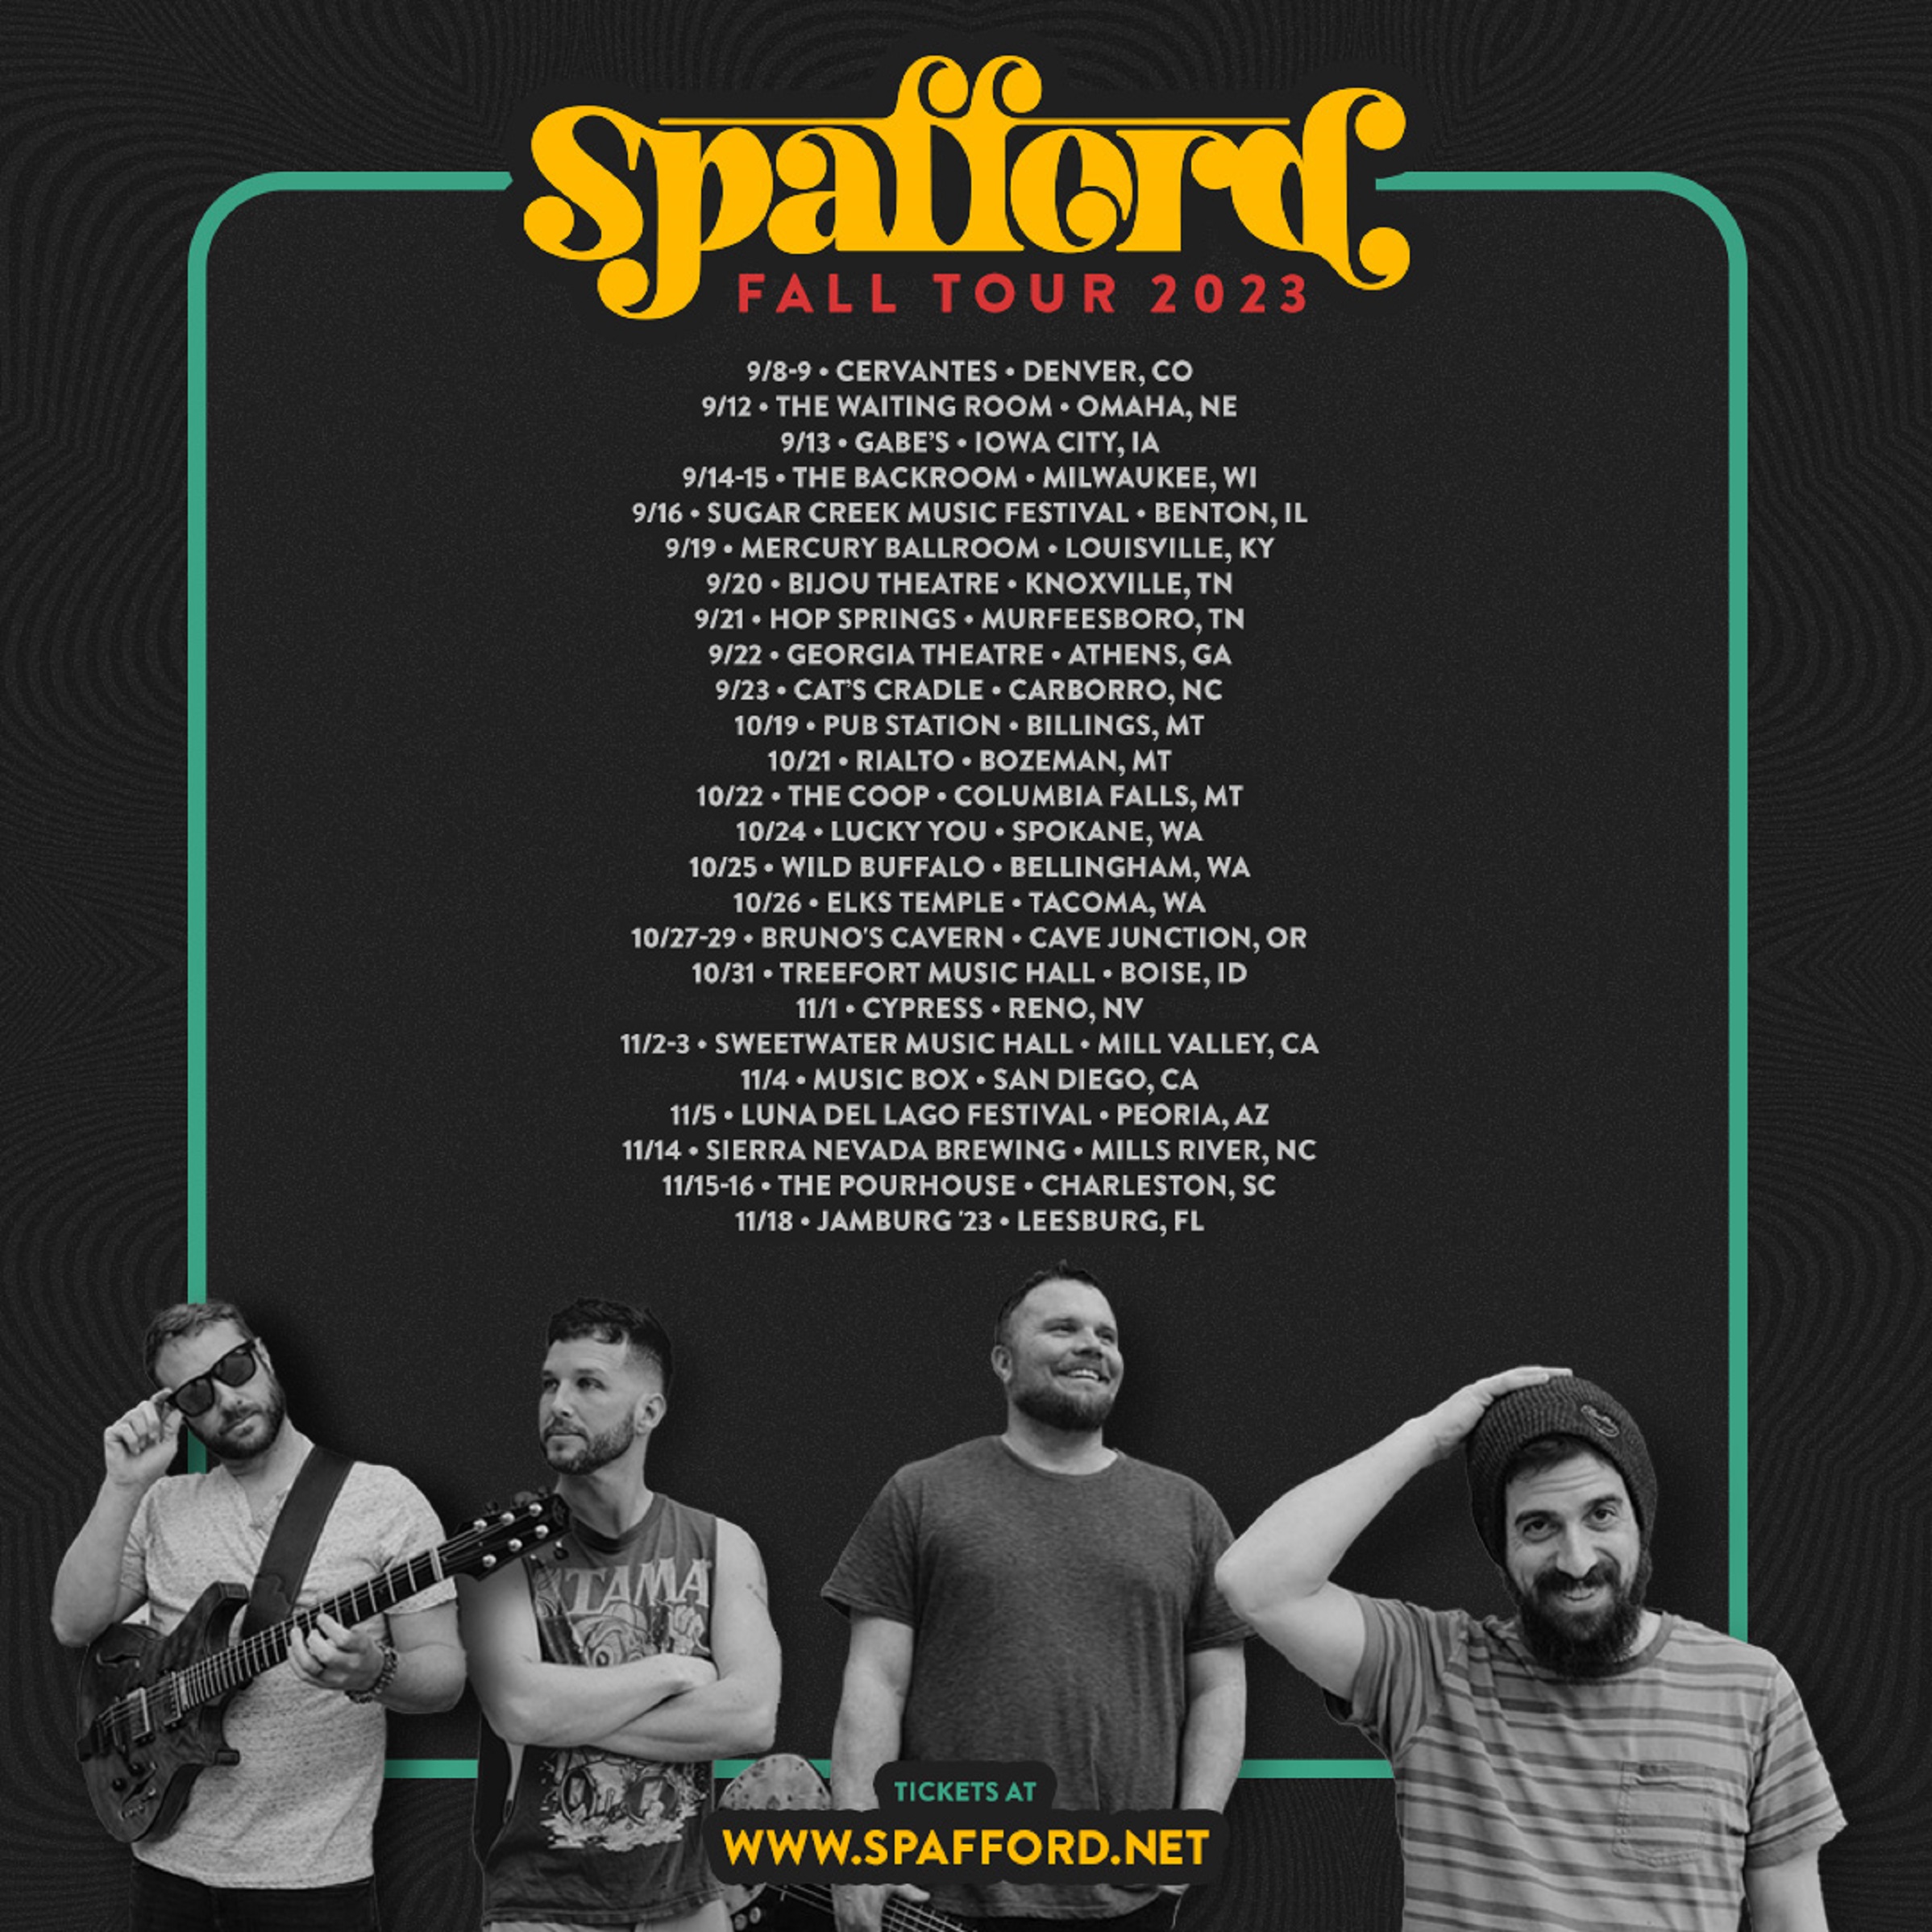 Spafford Commences 2023 Fall Tour with Unique Covers and an Original Nod to Colorado